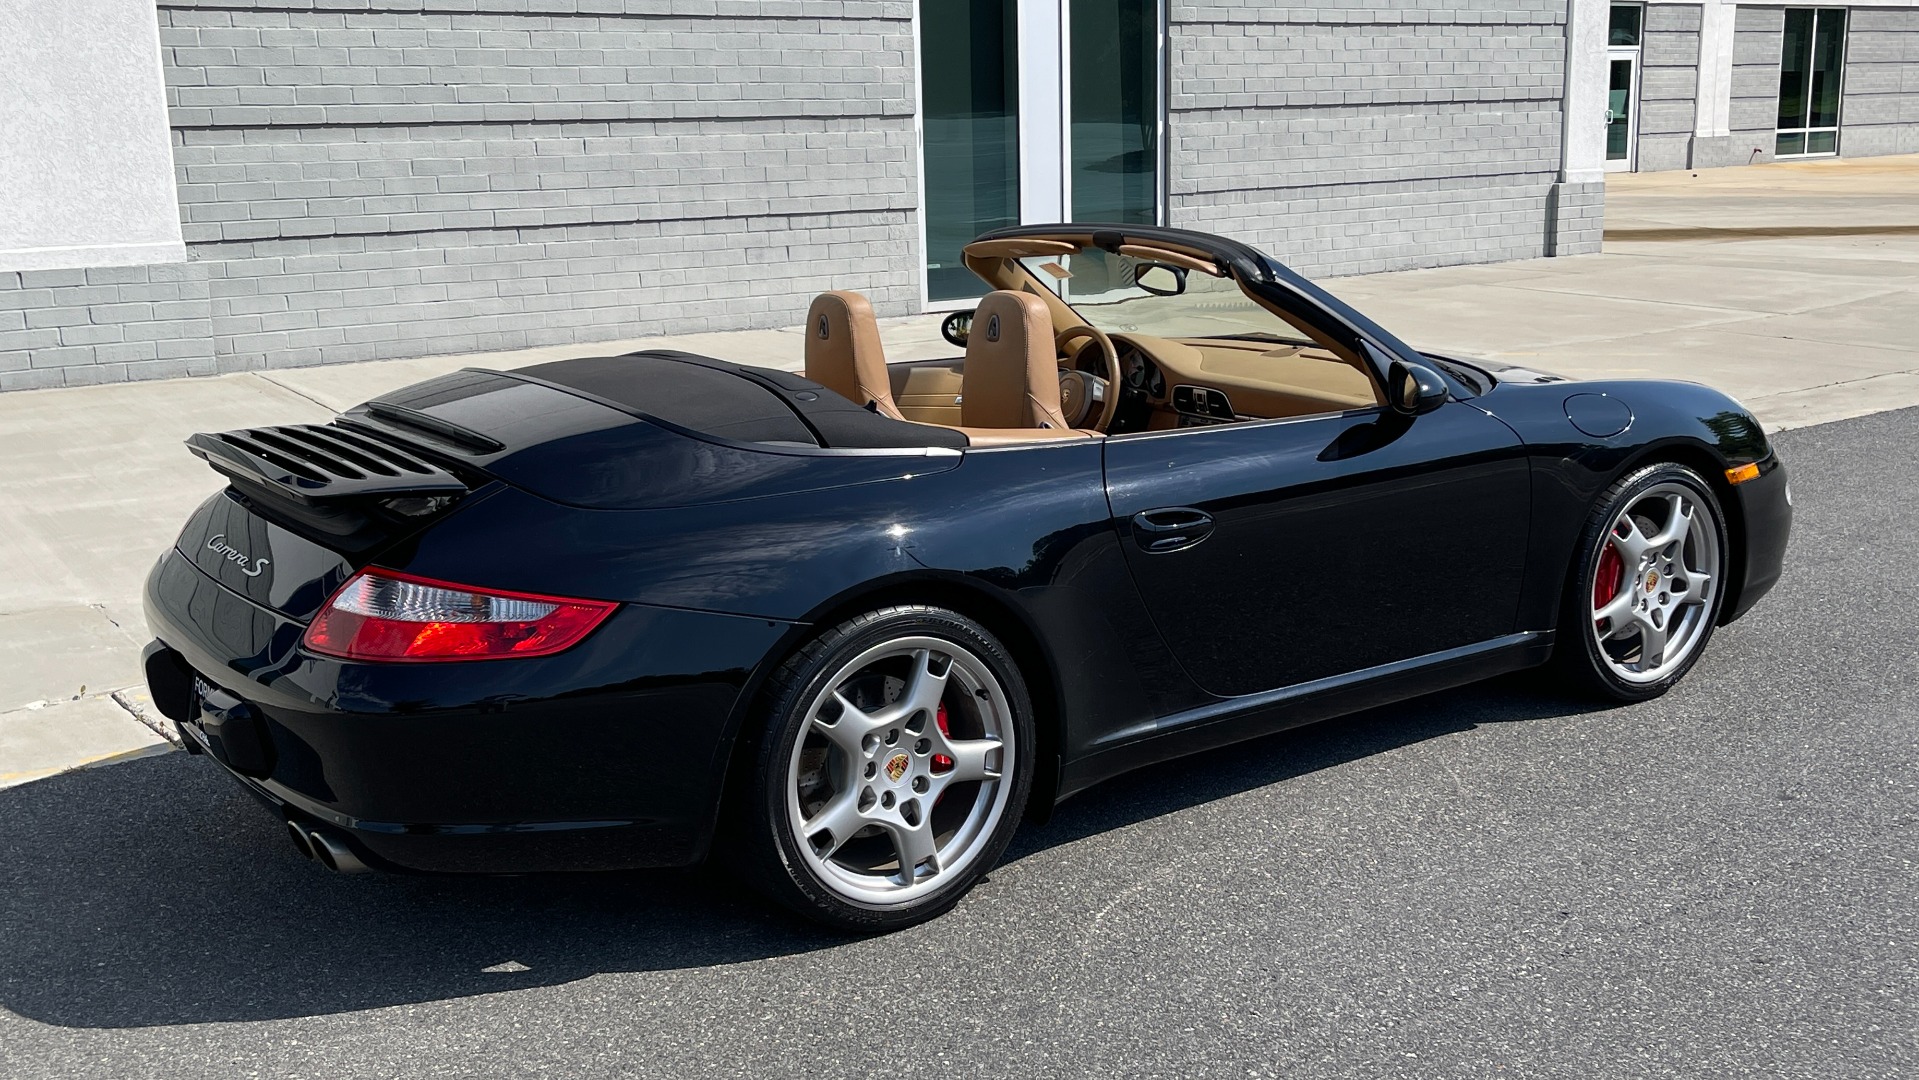 Used 2006 Porsche 911 CARRERA S CABRIOLET / BOSE / CD CHANGER / PWR SEAT PKG / HTD STS for sale $56,400 at Formula Imports in Charlotte NC 28227 5